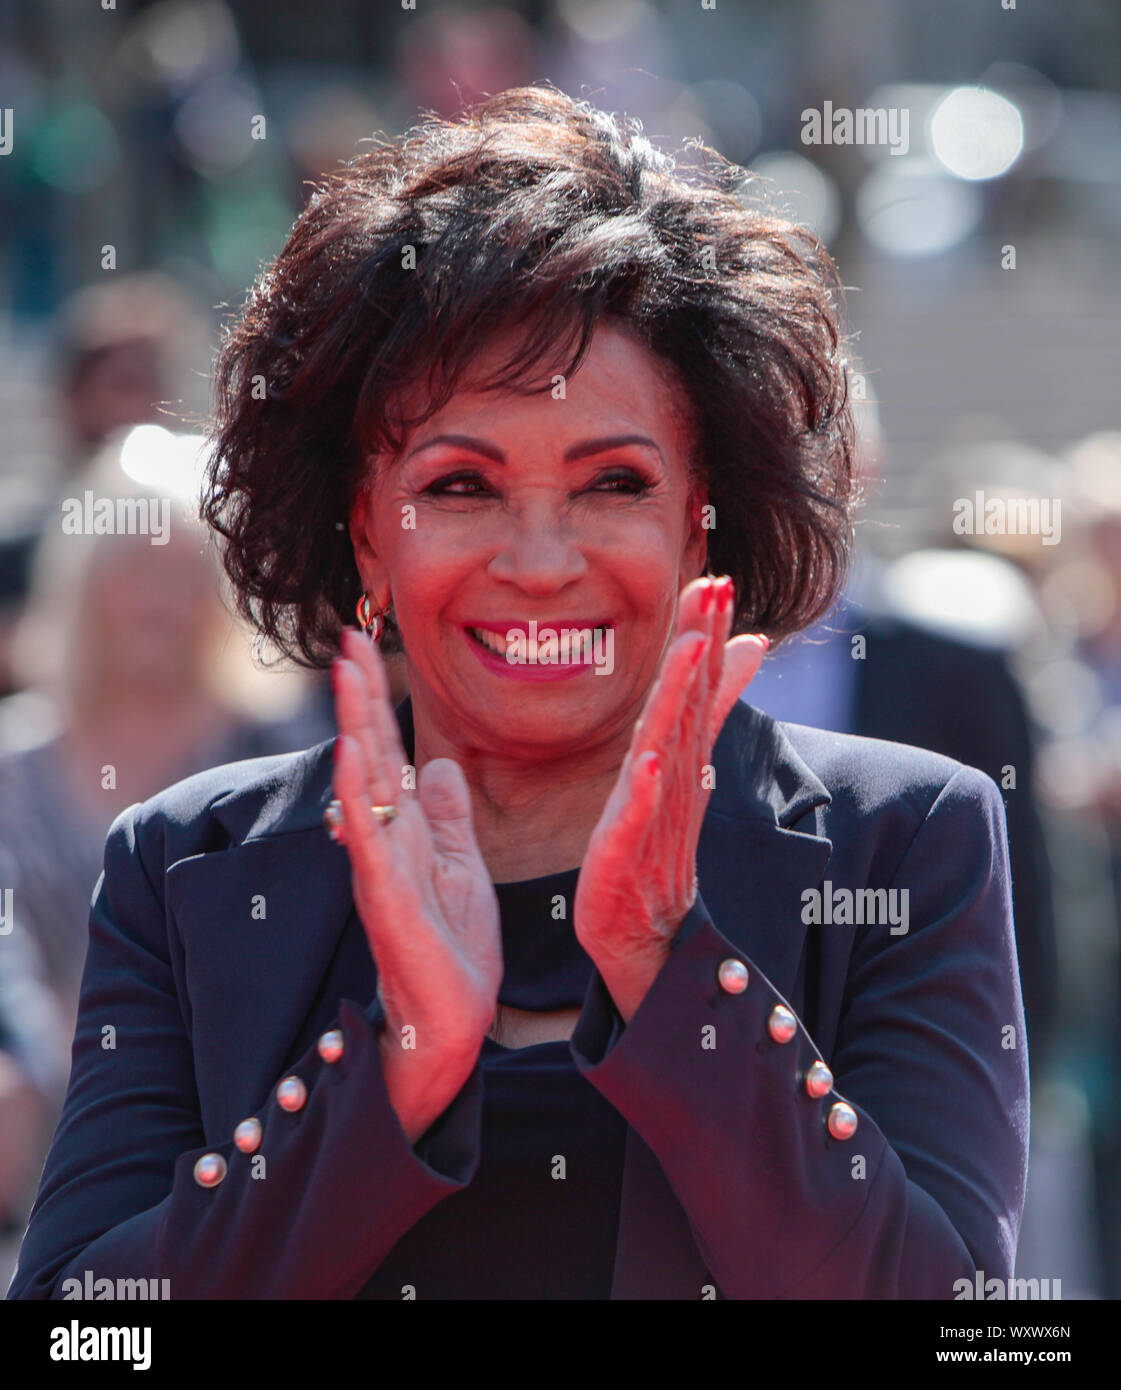 London UK 18 September 2019 legendary singer, Dame Shirley Bassey, unveiling her handprints in the form of a bronze plaque in Wembley Park's ‘Square of Fame' at The SSE Arena, Wembley. The star first performed at the venue 60 years ago in a performance that inaugurated the Empire Pool, Wembley (as it was known then), as a music and entertainment venue, and began its reputation as one of the world's most iconic concert venues. Credit: Paul Quezada-Neiman/Alamy Live News Stock Photo